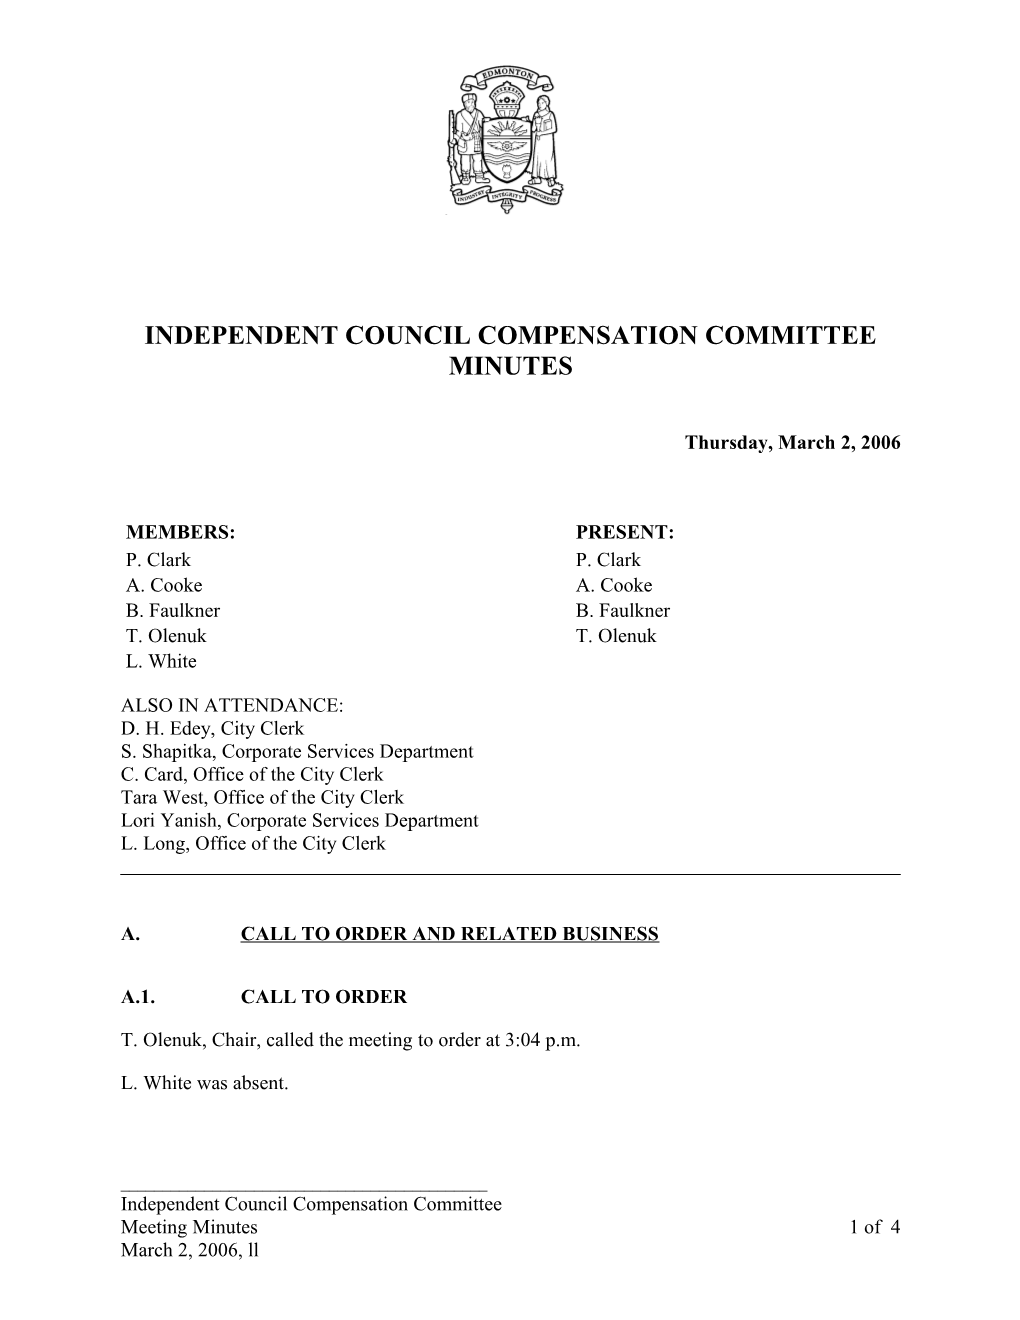 Minutes for Independent Council Compensation Committee March 2, 2006 Meeting